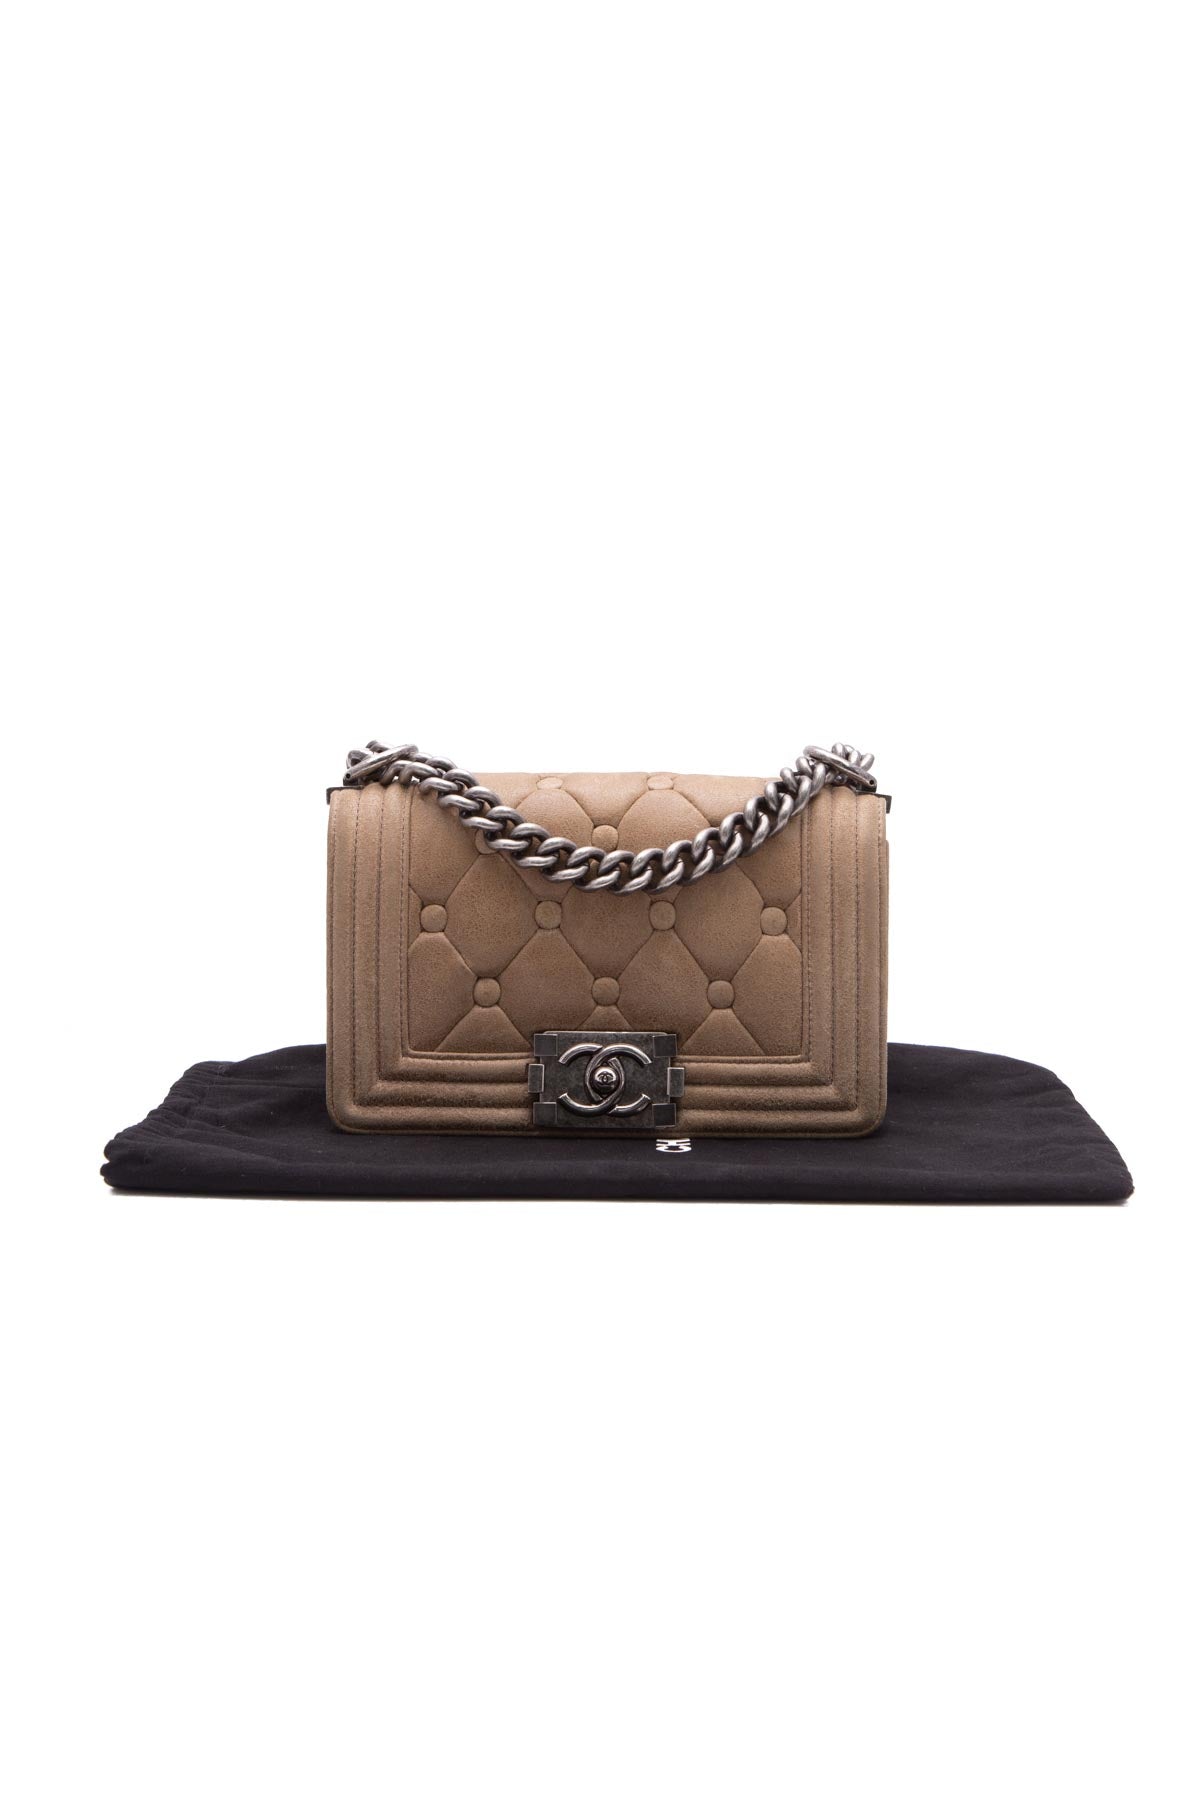 Chanel Chesterfield Small Boy Bag - Couture USA